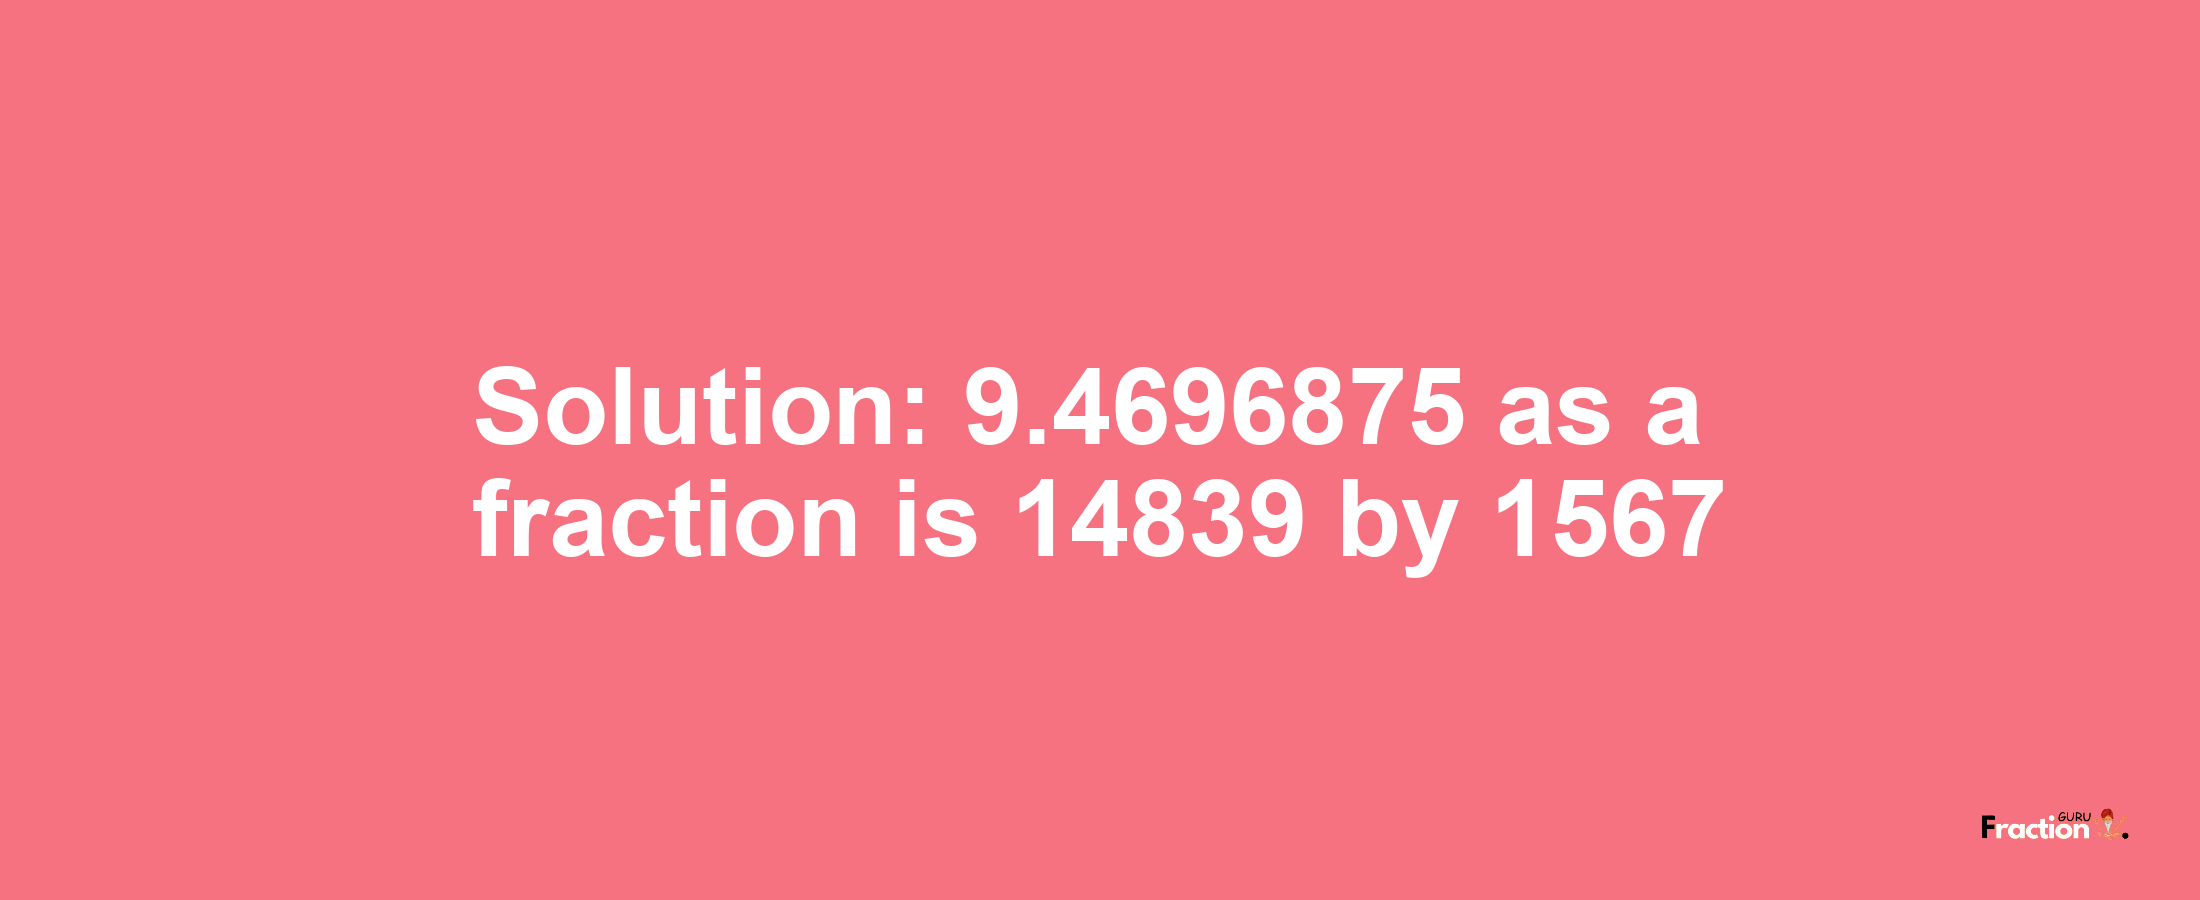 Solution:9.4696875 as a fraction is 14839/1567